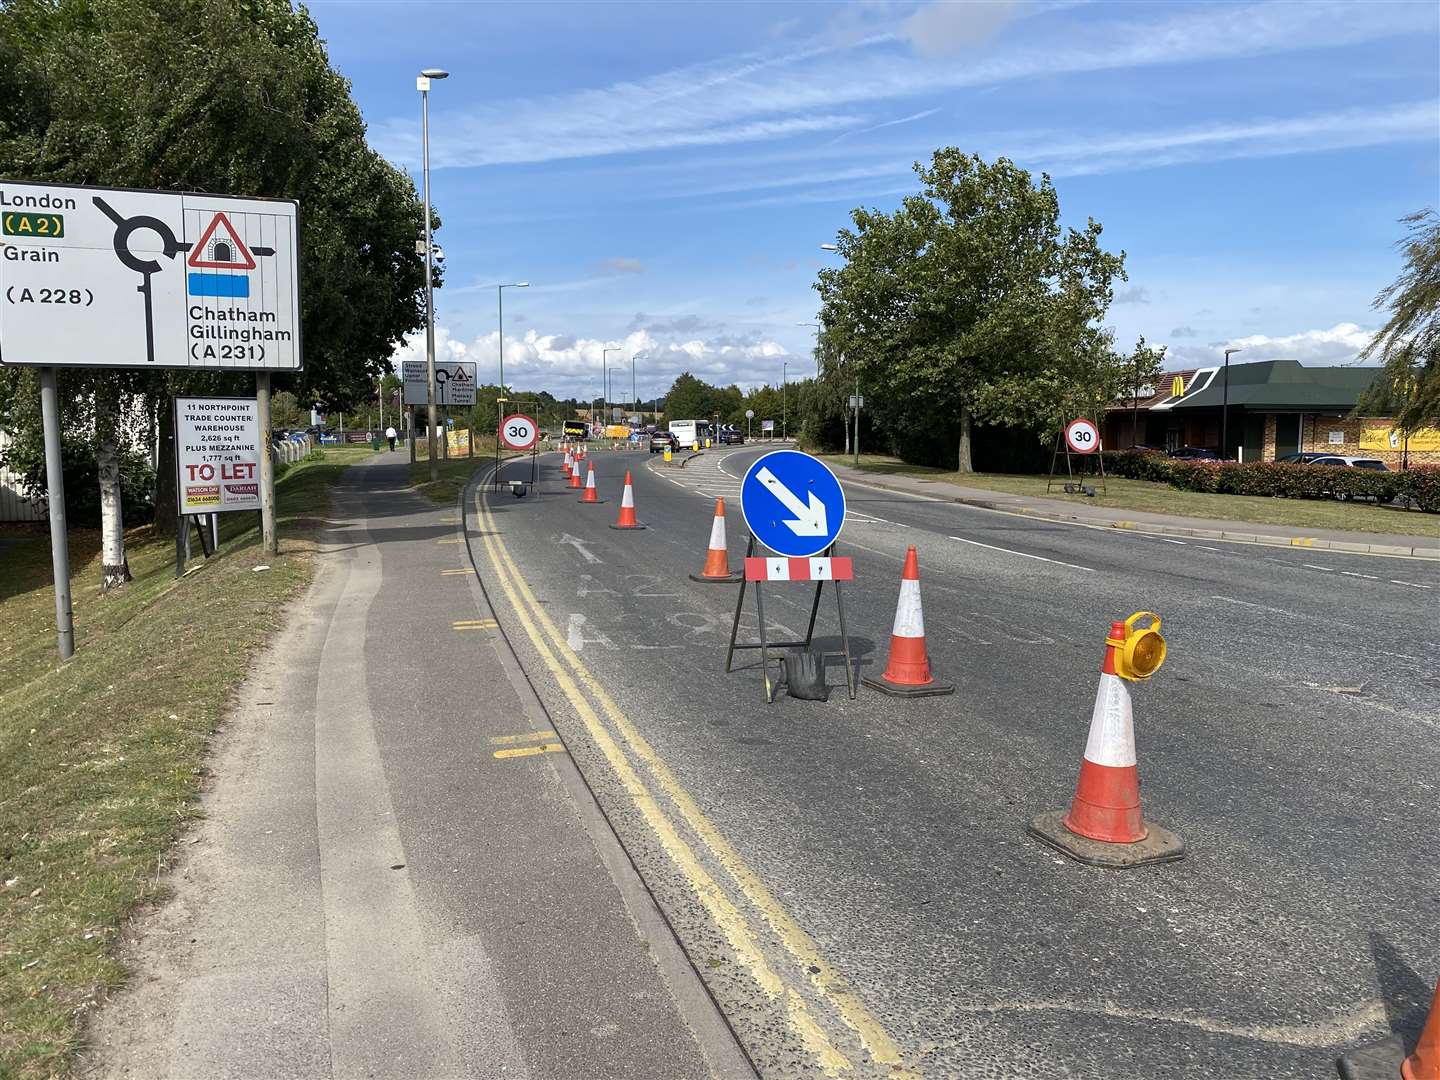 The lane closure approaching the Anthony's Way roundabout has been in place since September